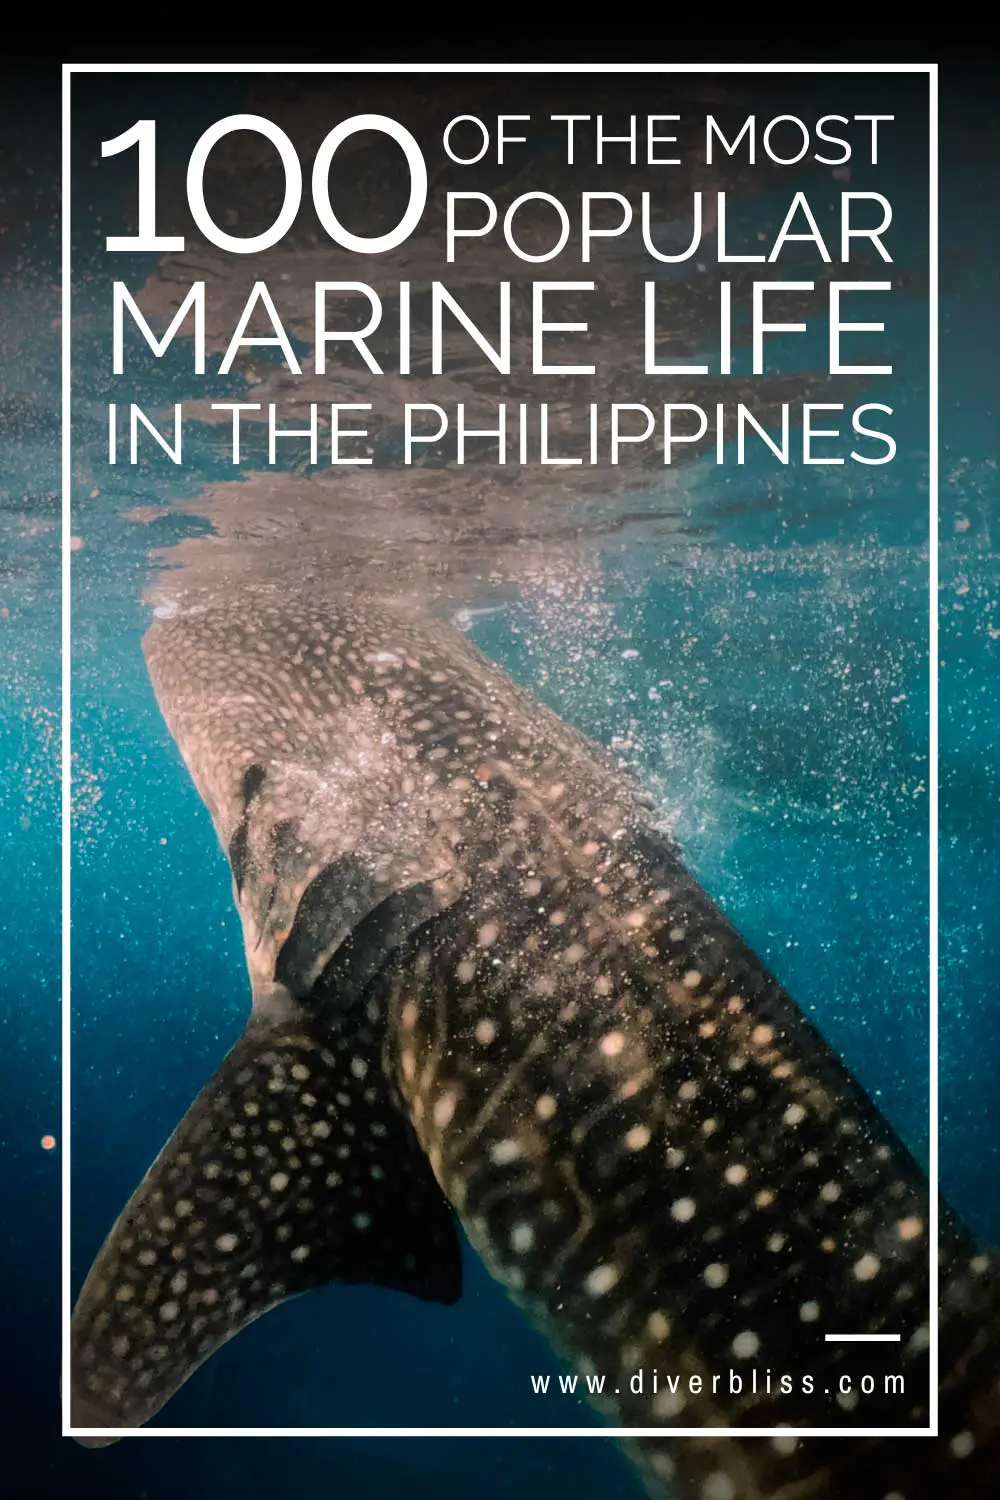 100 of the most popular marine life in the philippines